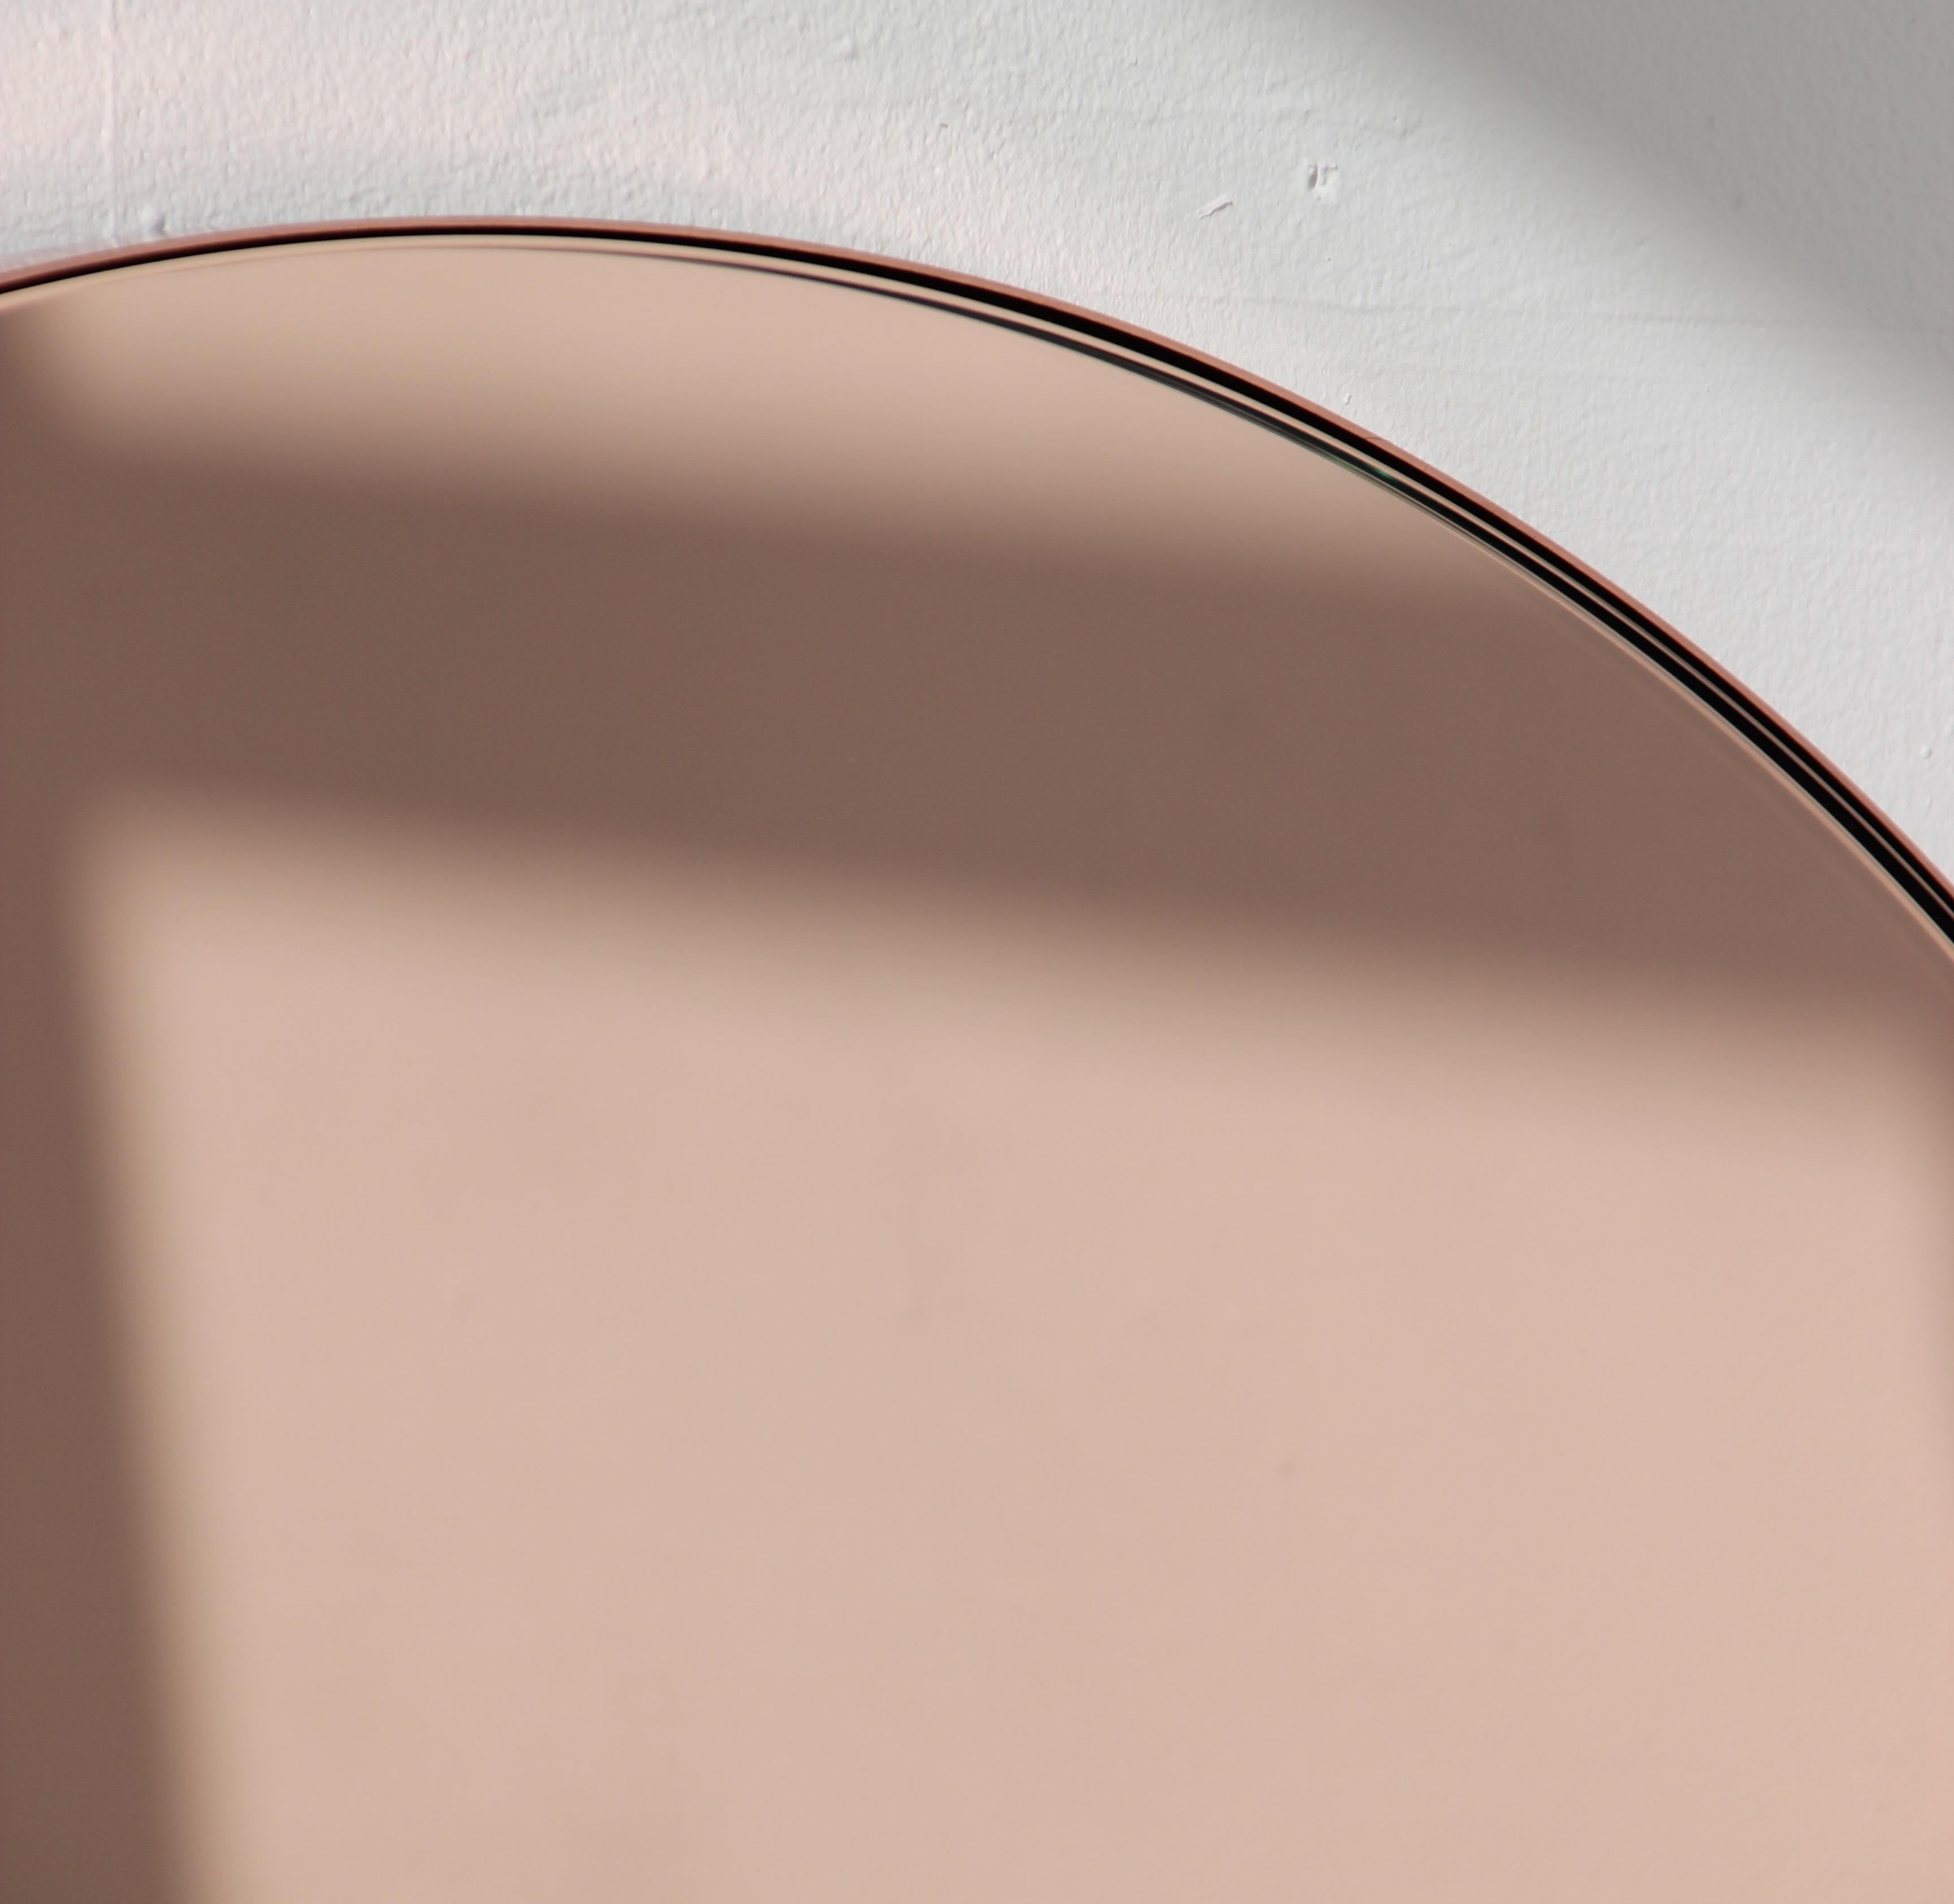 Organic Modern Orbis™ Rose Gold Tinted Round Modern Mirror with Copper Frame - Oversized